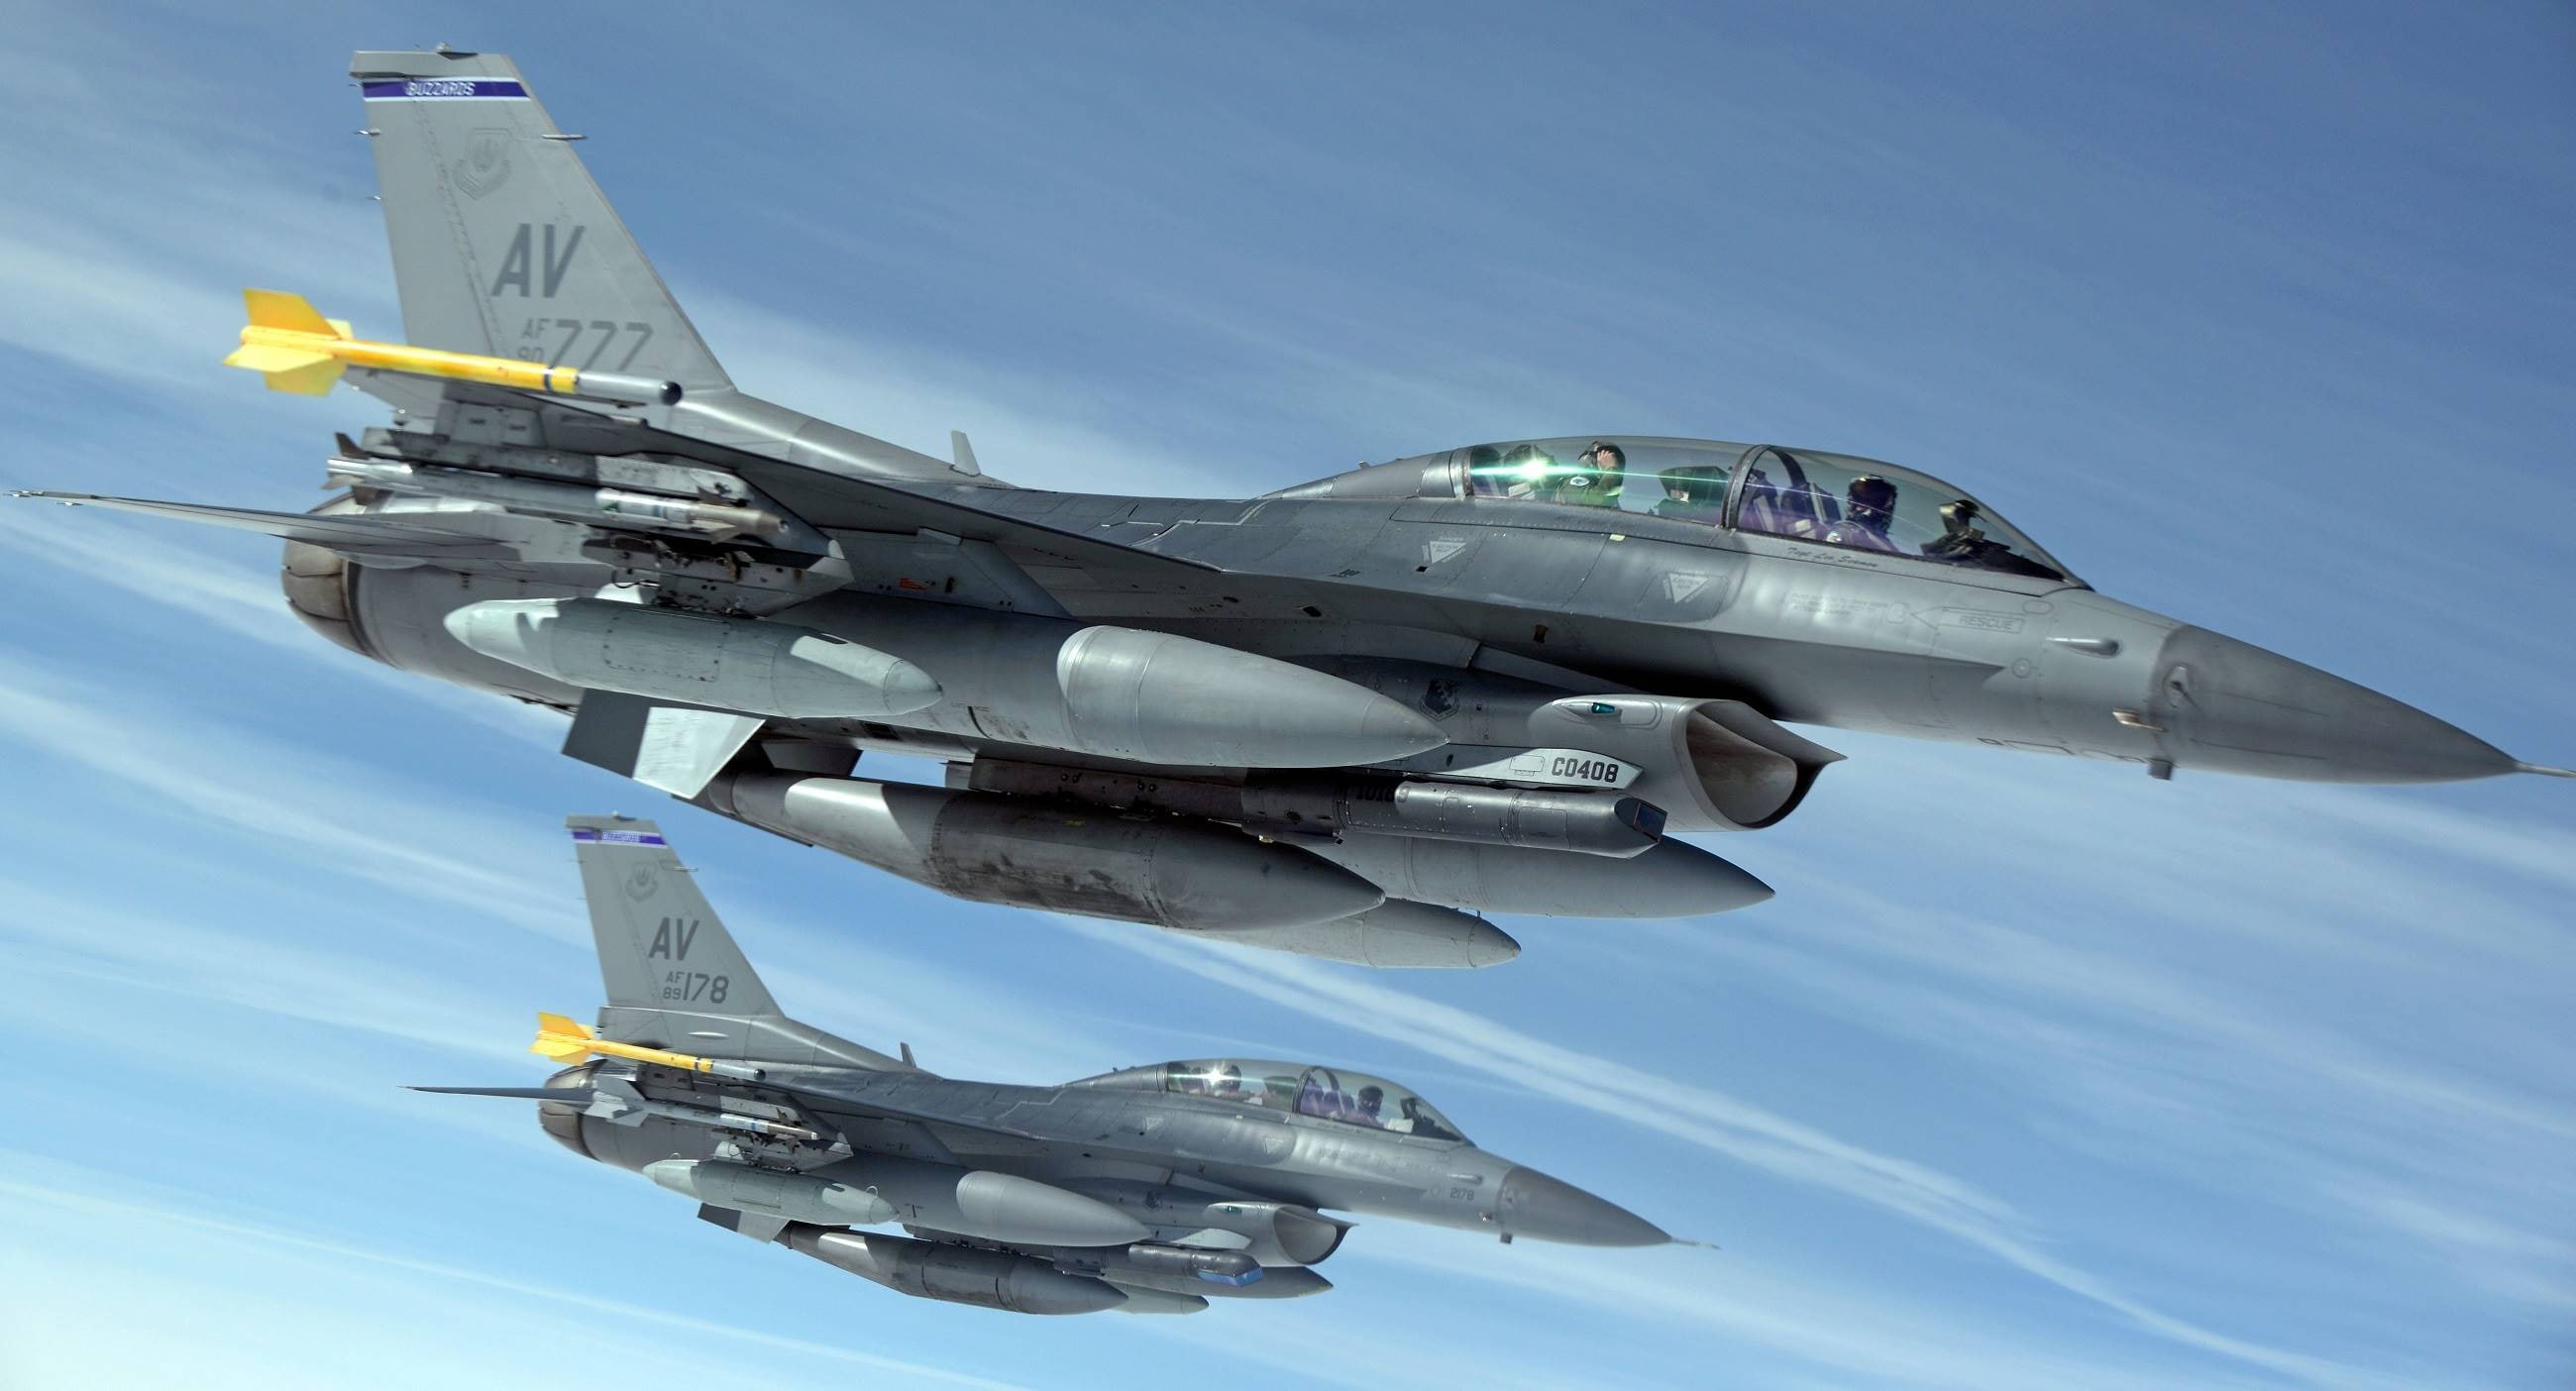 flying, aviation, airplanes, f16, military, jets